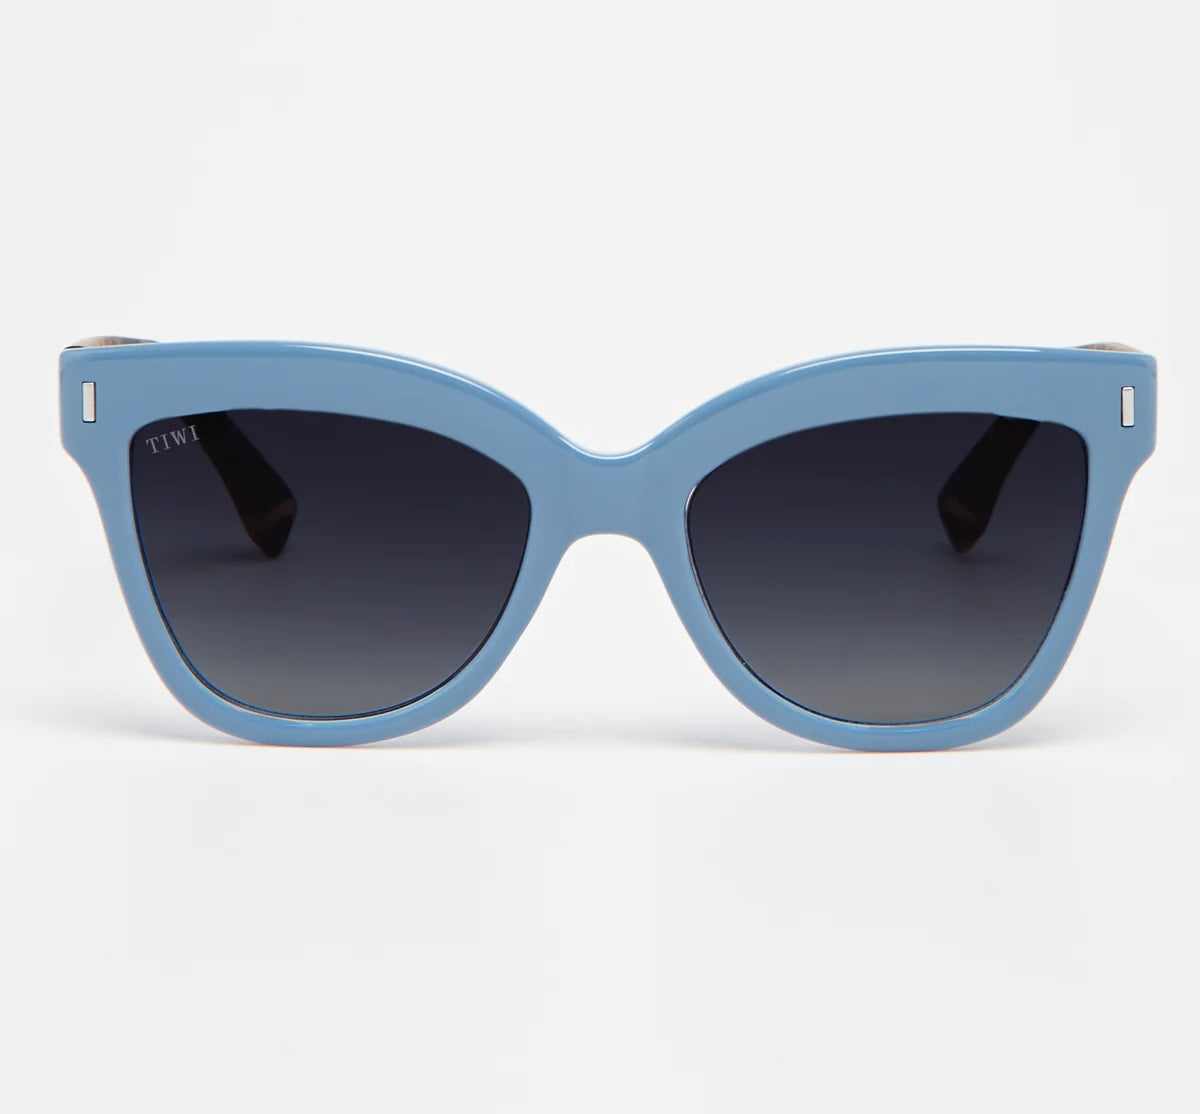 MAUI Sunglasses Available in more colors Pastel Blue with Tortoise Temples  